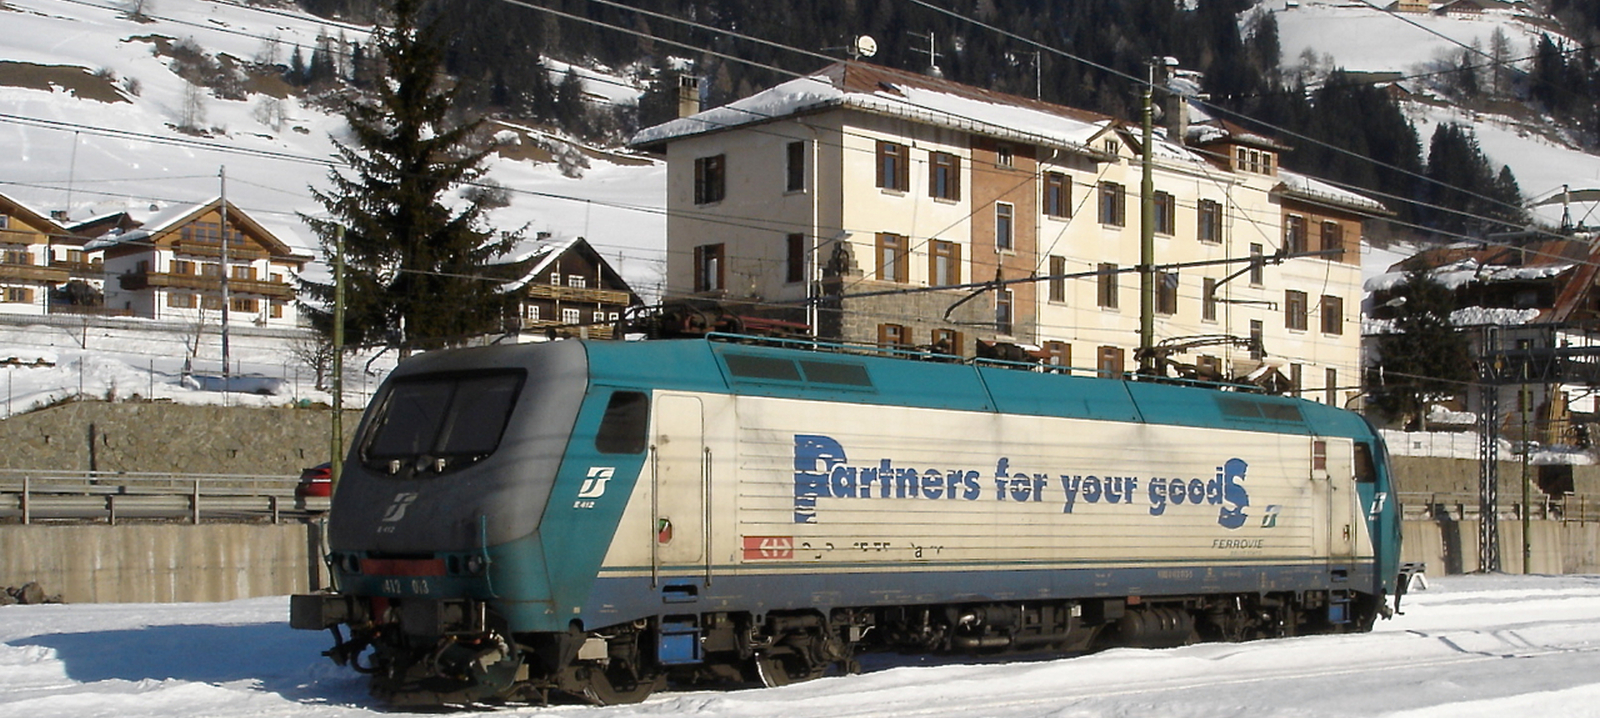 E.412.013 in December 2008 at San Candido train station